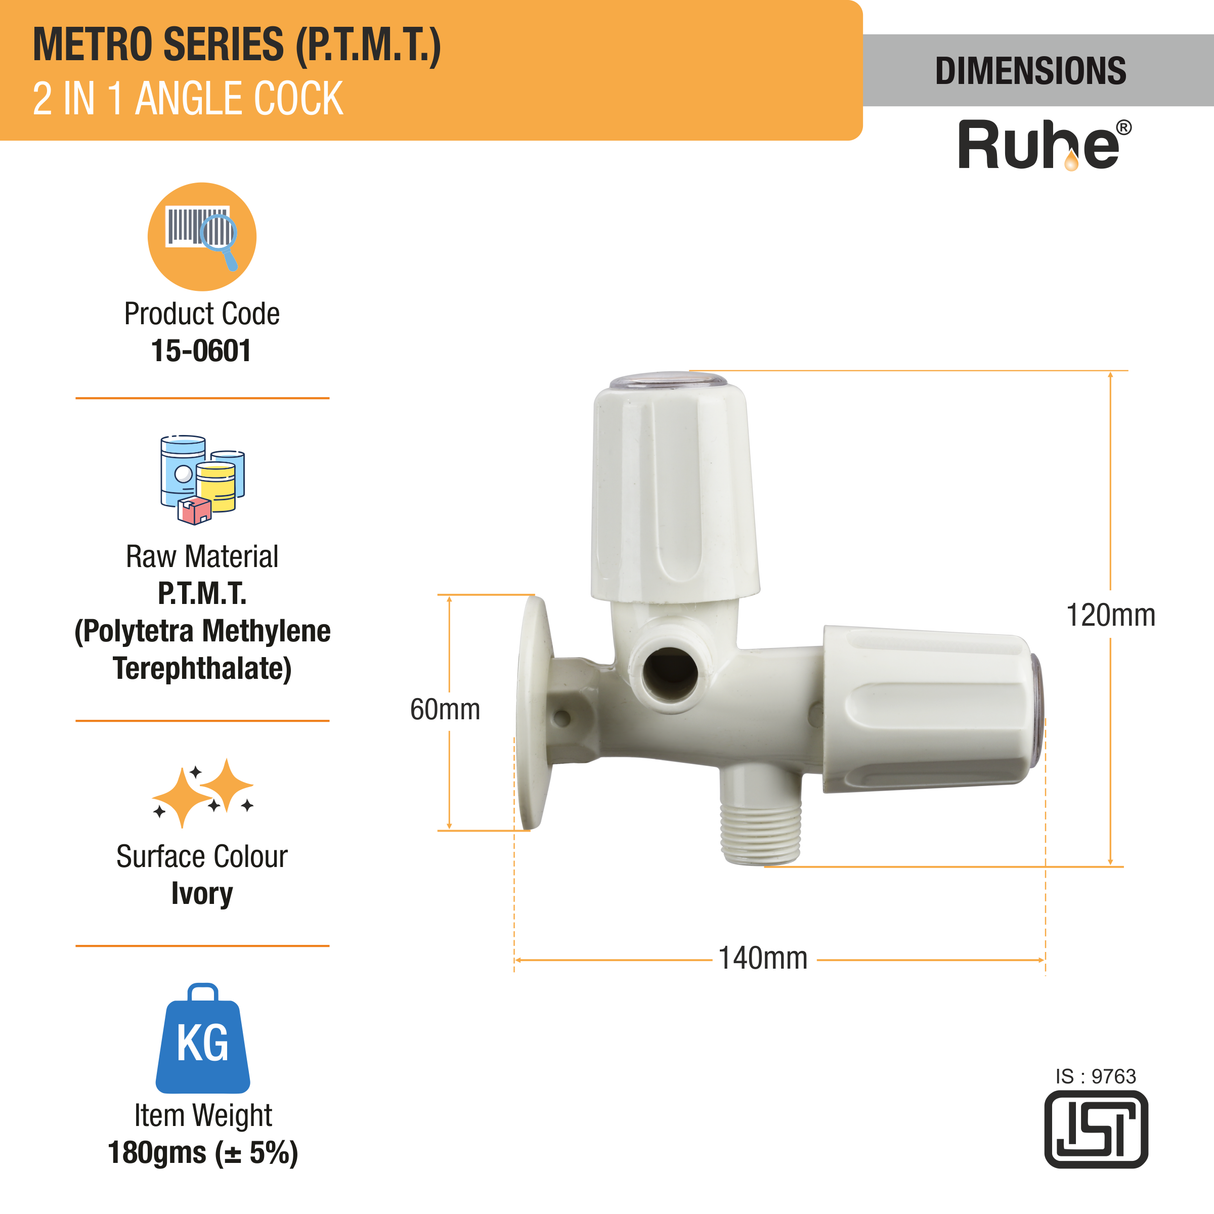 Metro PTMT 2 in1 Angle Cock Faucet dimensions and size